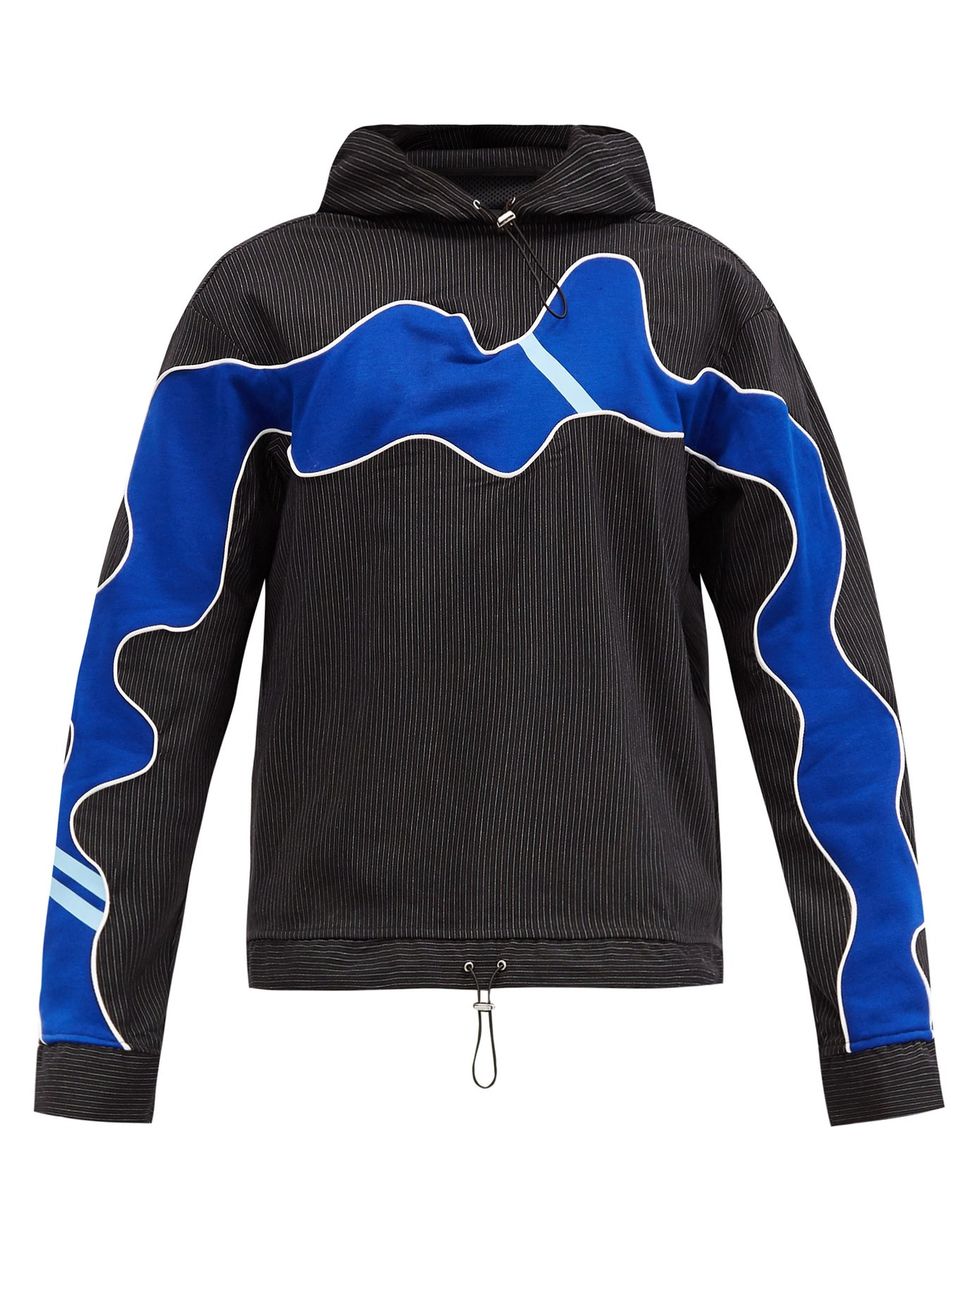 Pinstriped upcycled cotton-blend hooded sweatshirt